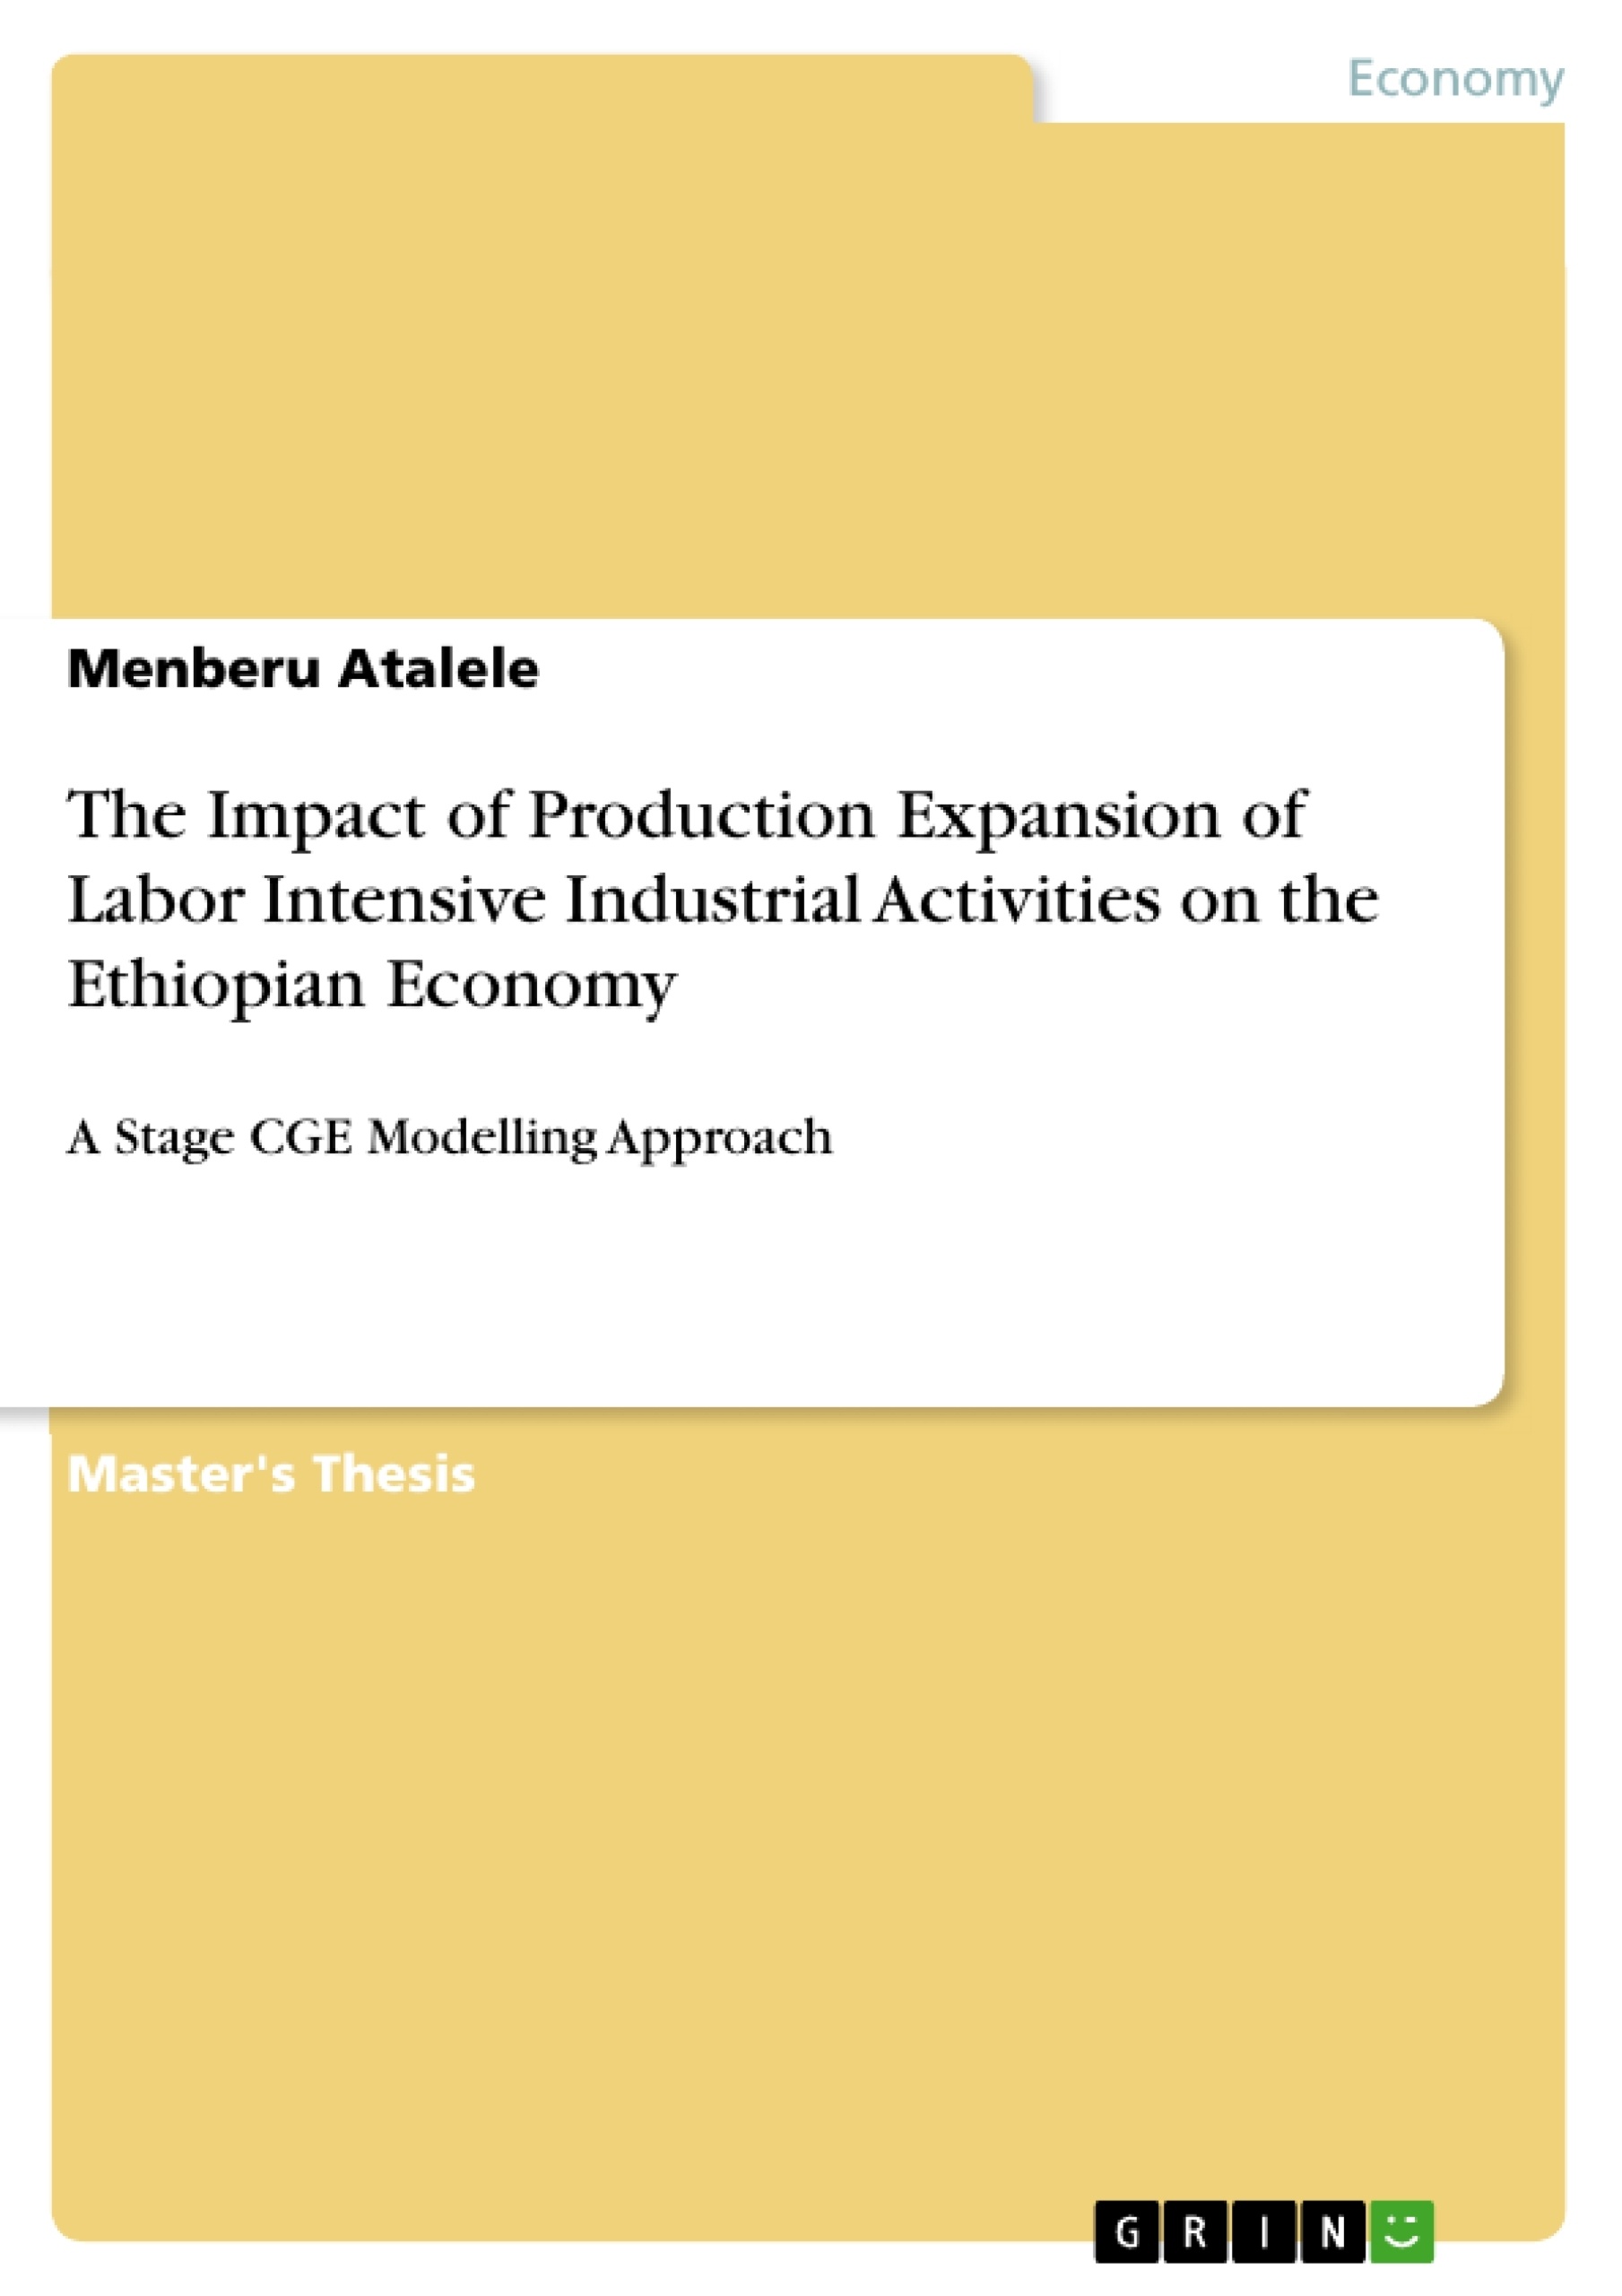 Título: The Impact of Production Expansion of Labor Intensive Industrial Activities on the Ethiopian Economy